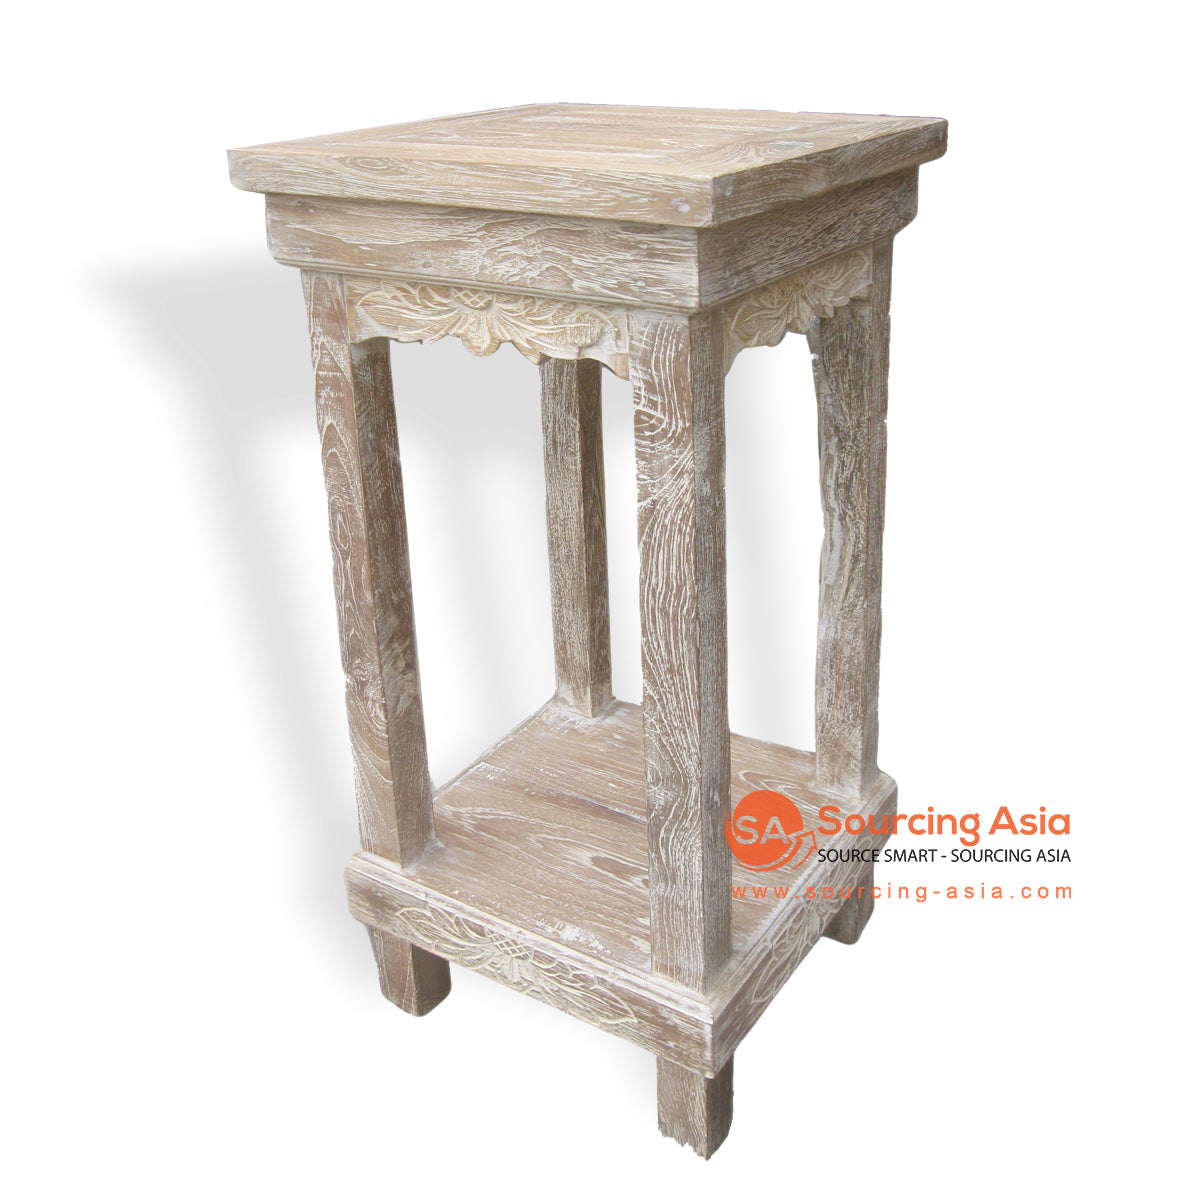 LAC019 WHITE WASH RECYCLED TEAK WOOD ONE SHELF PLANT STAND SIDE TABLE